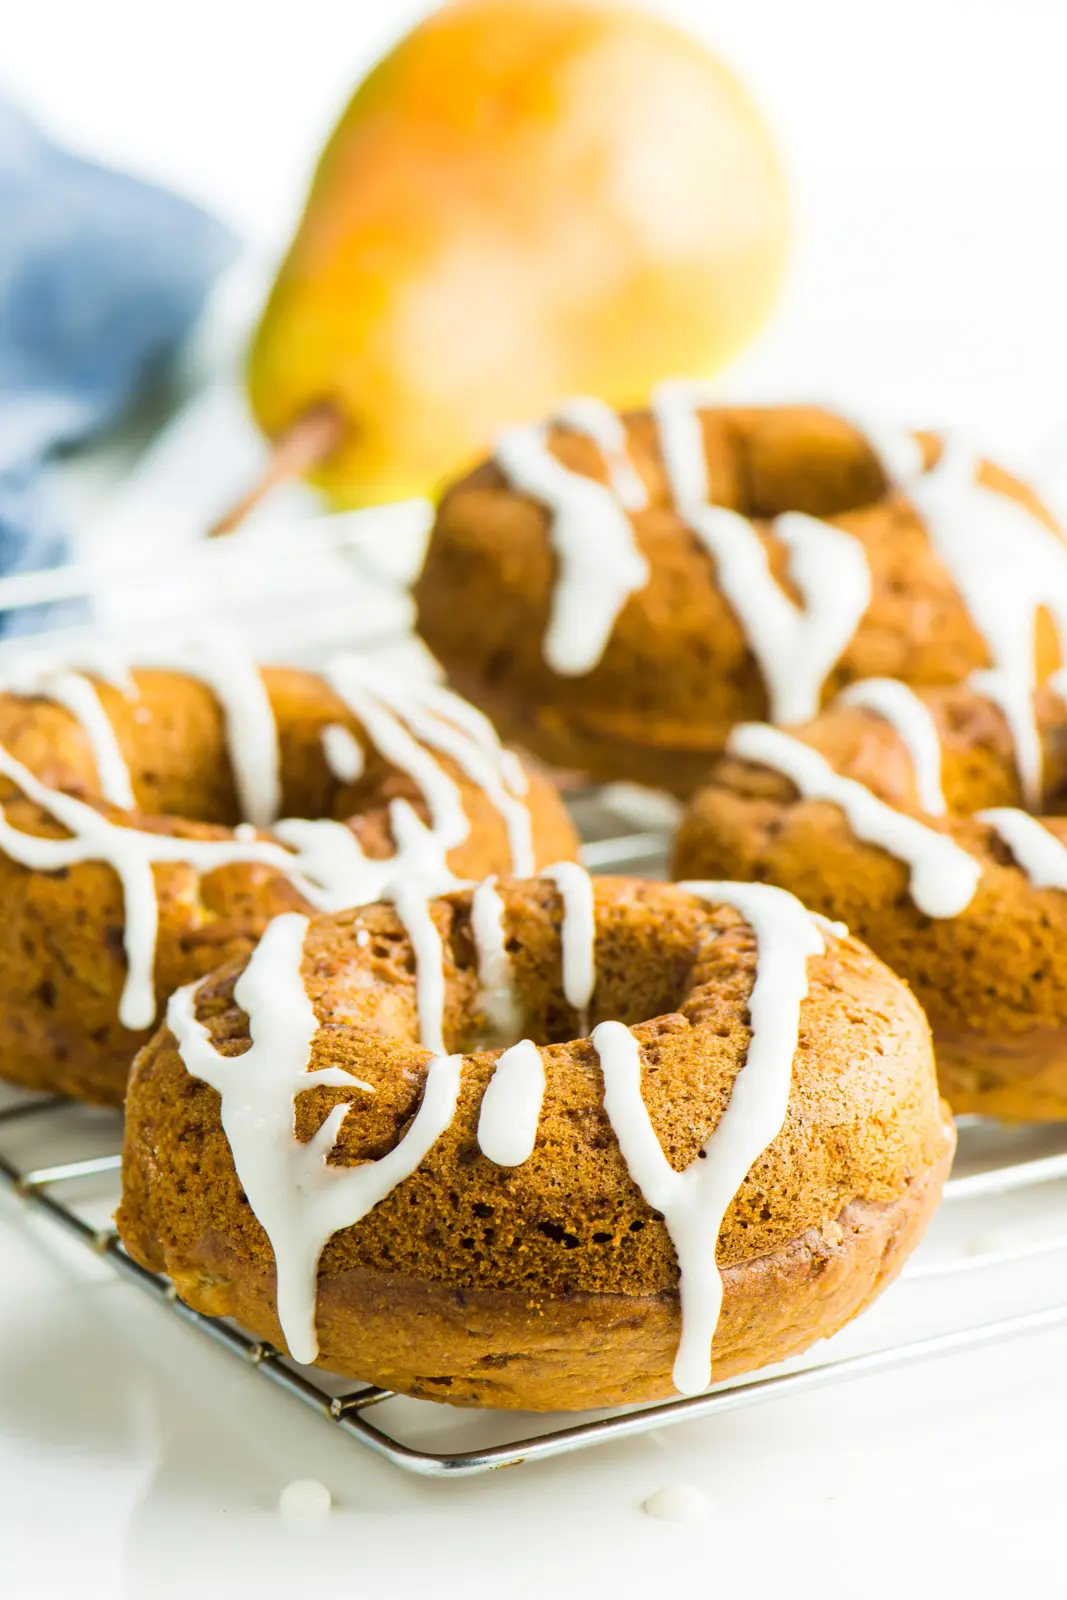 Several ginger donuts sit on a baking rack. They have icing drizzled over the top.